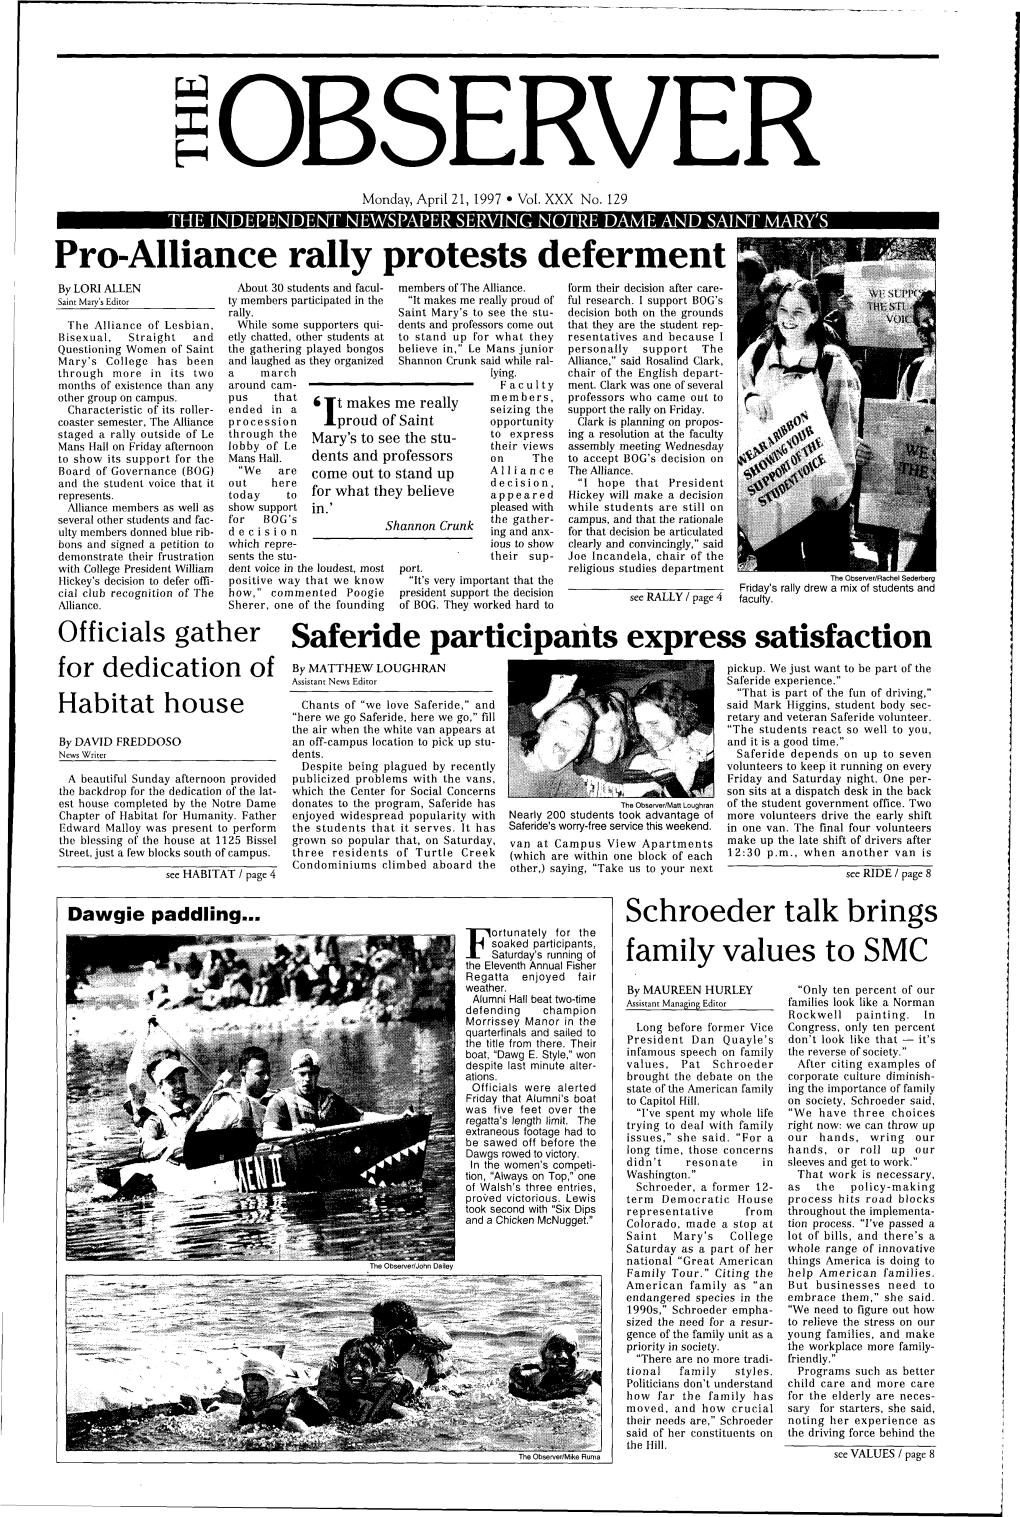 Pro-Alliance Rally Protests Deferment by LORI ALLEN About 30 Students and Facul­ Members of the Alliance